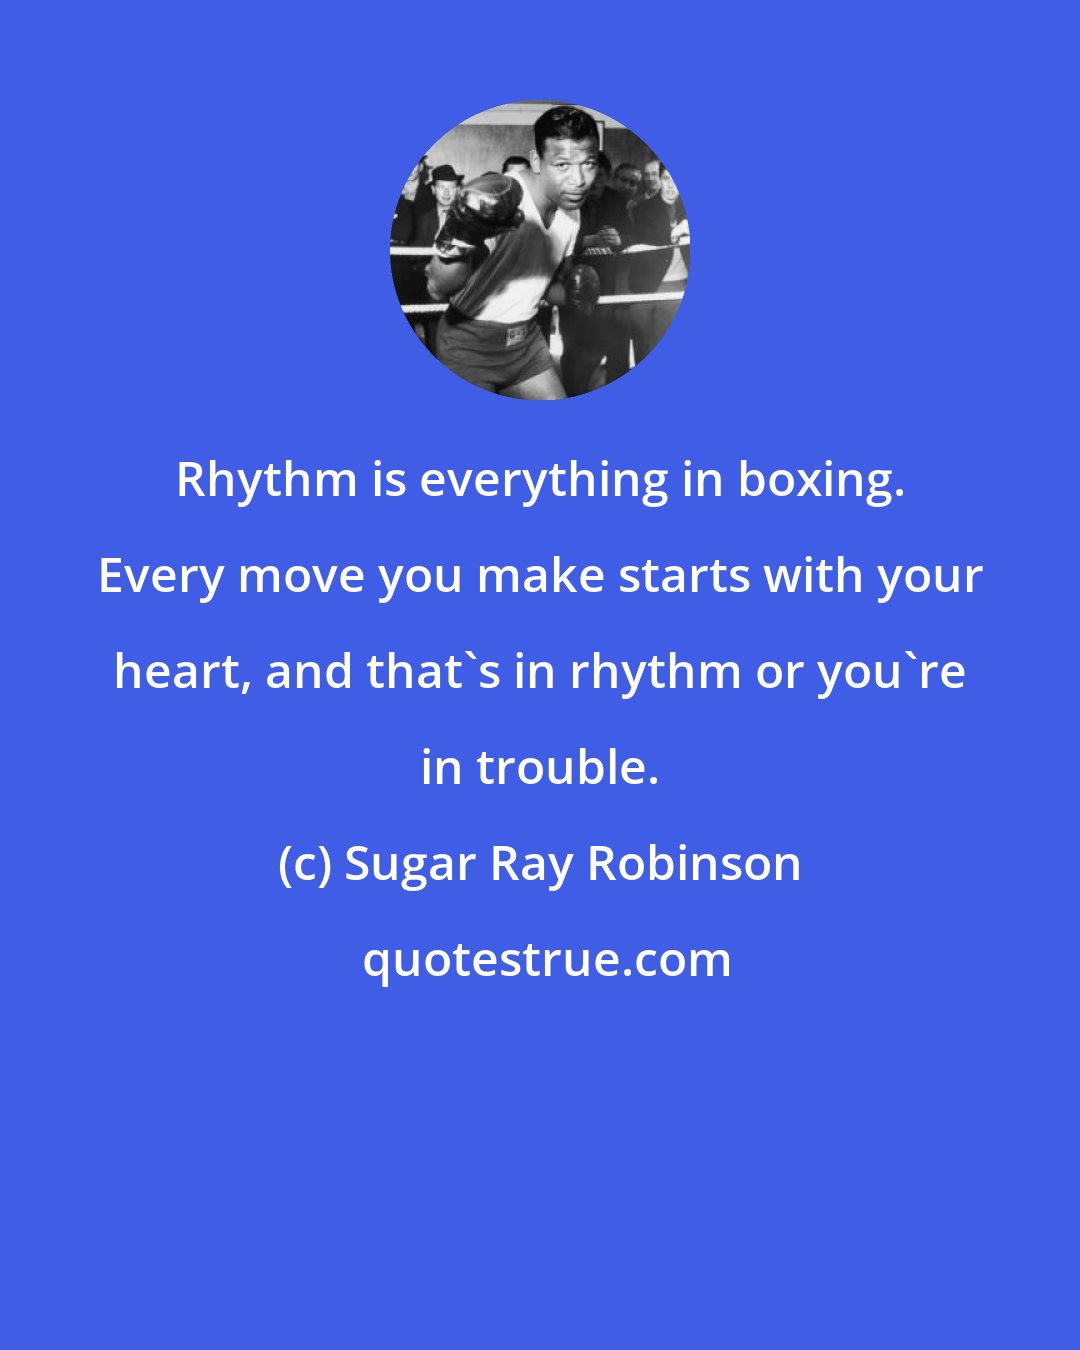 Sugar Ray Robinson: Rhythm is everything in boxing. Every move you make starts with your heart, and that's in rhythm or you're in trouble.